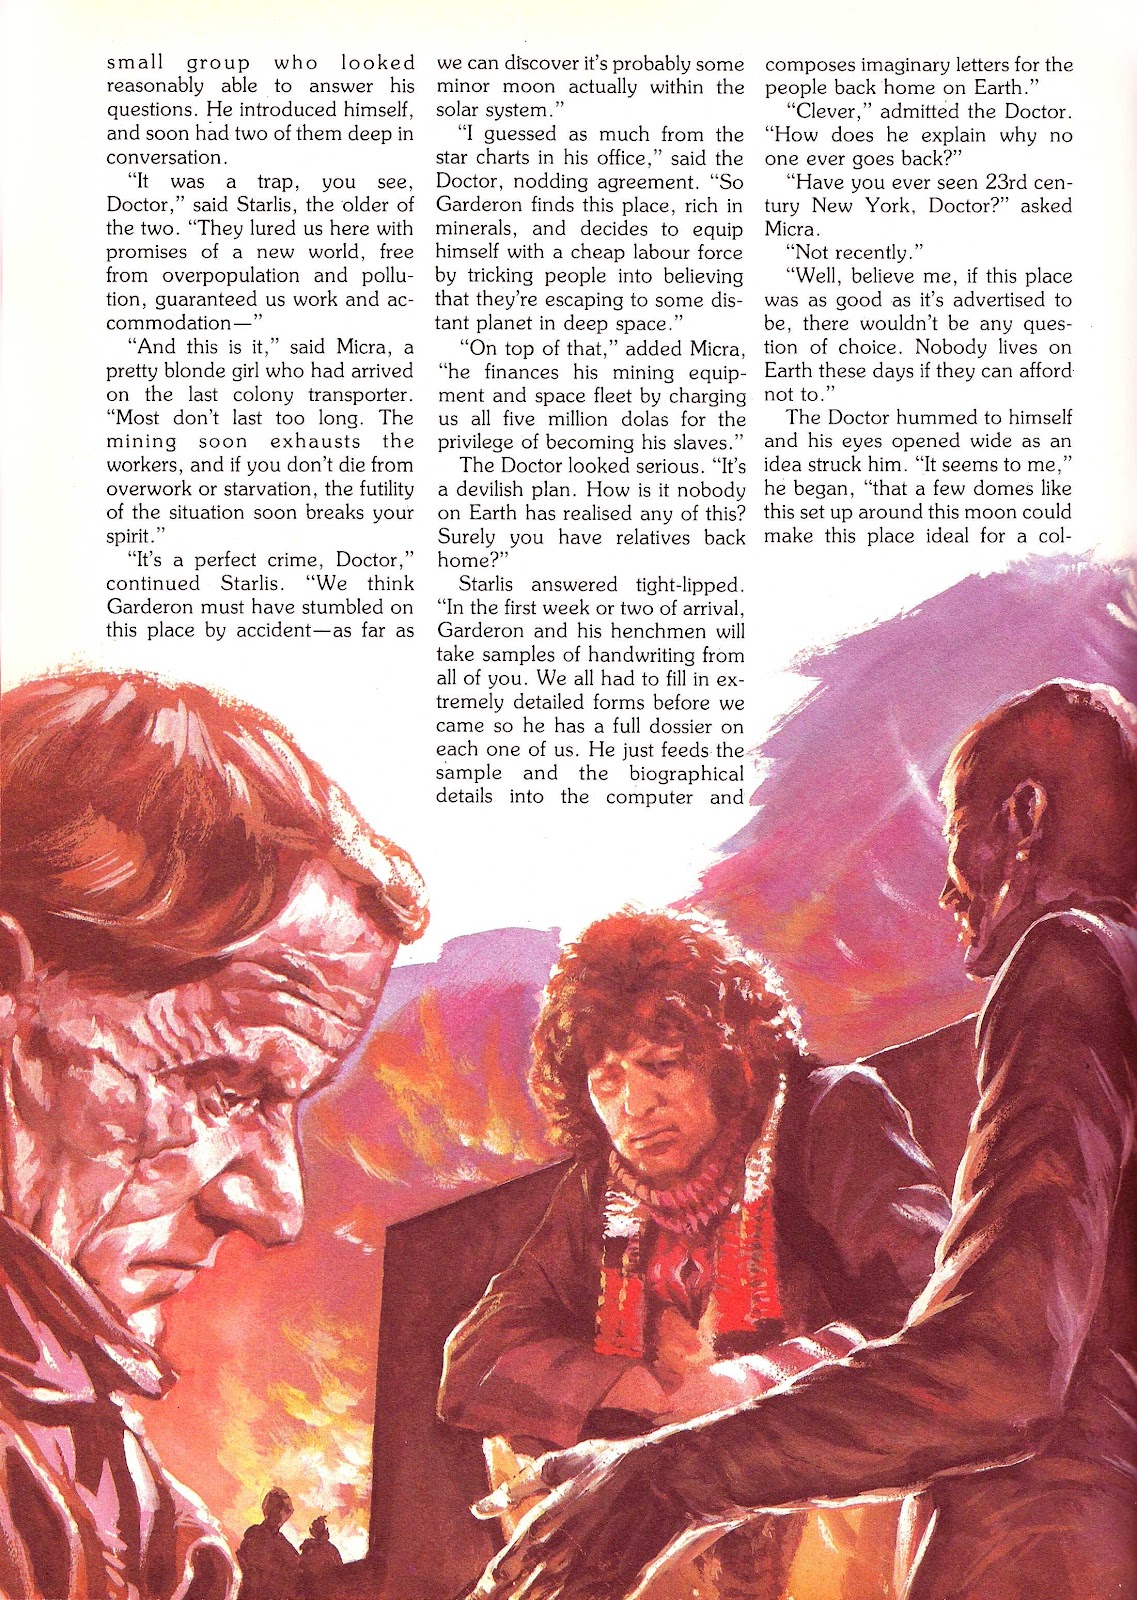 Doctor Who Annual issue 1981 - Page 9